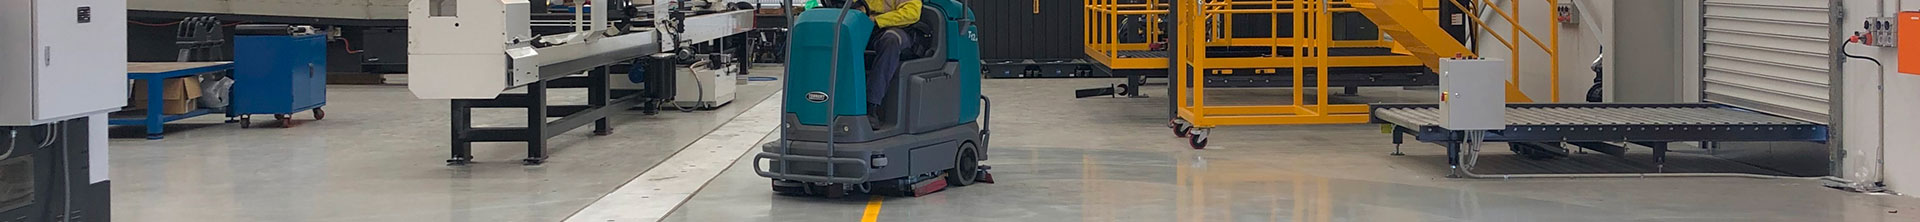 T12 Ride-On Scrubber cleaning a manufacturing facility